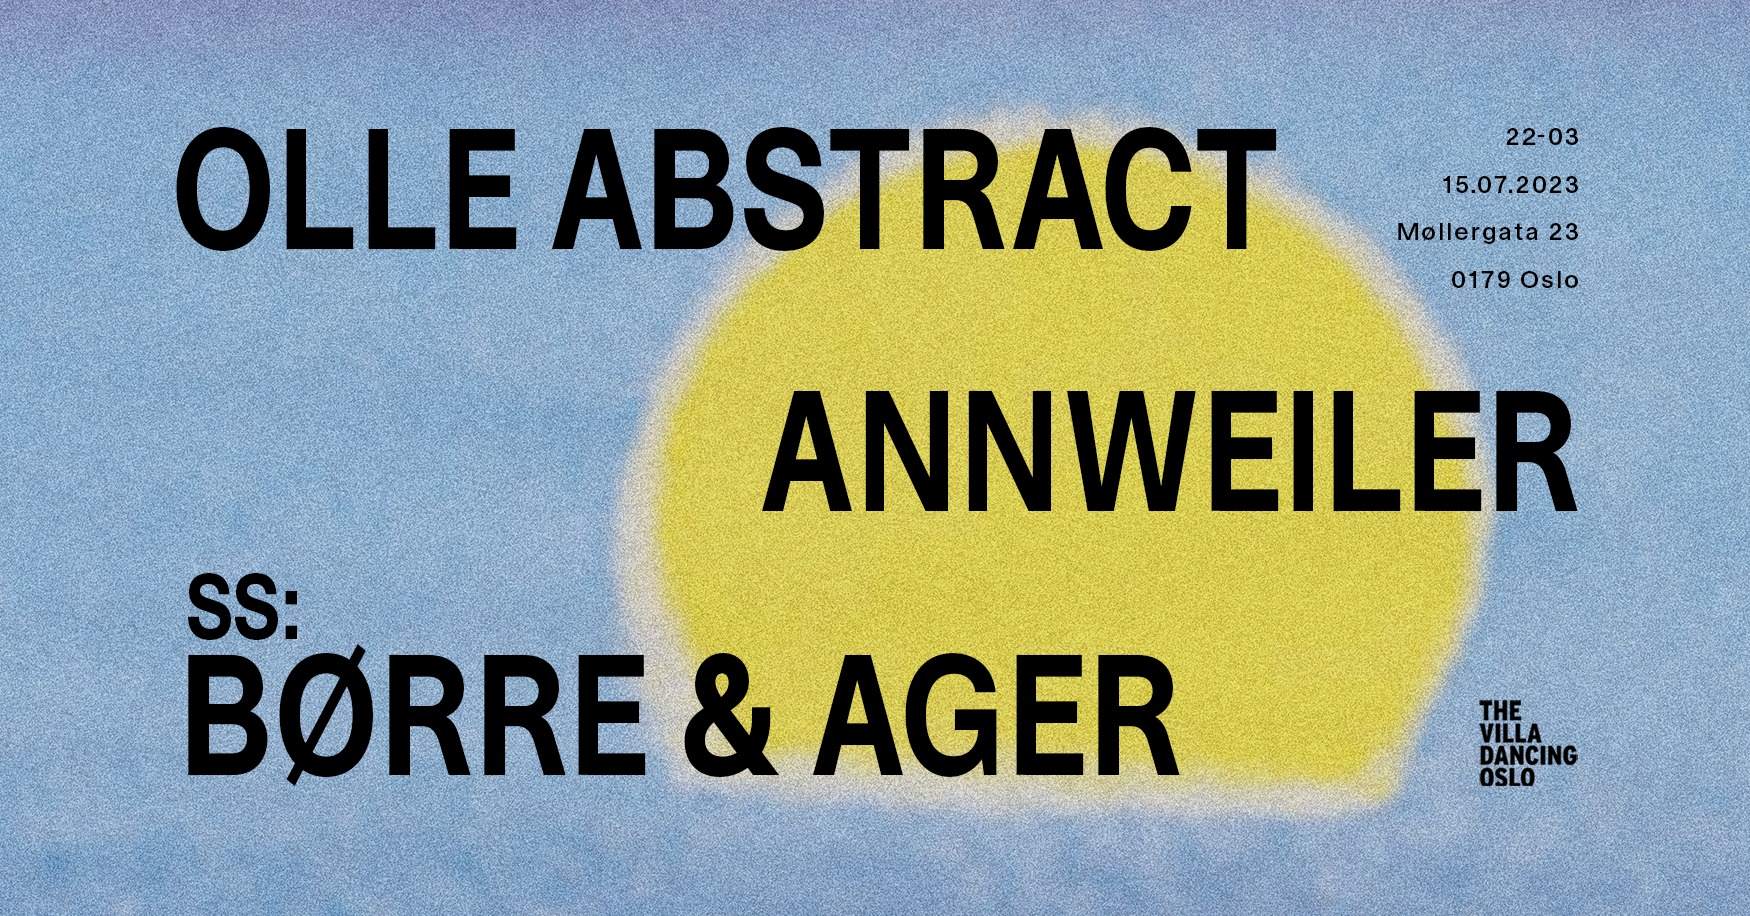 Olle Abstract & Annweiler // SS: Børre & Ager - Página frontal